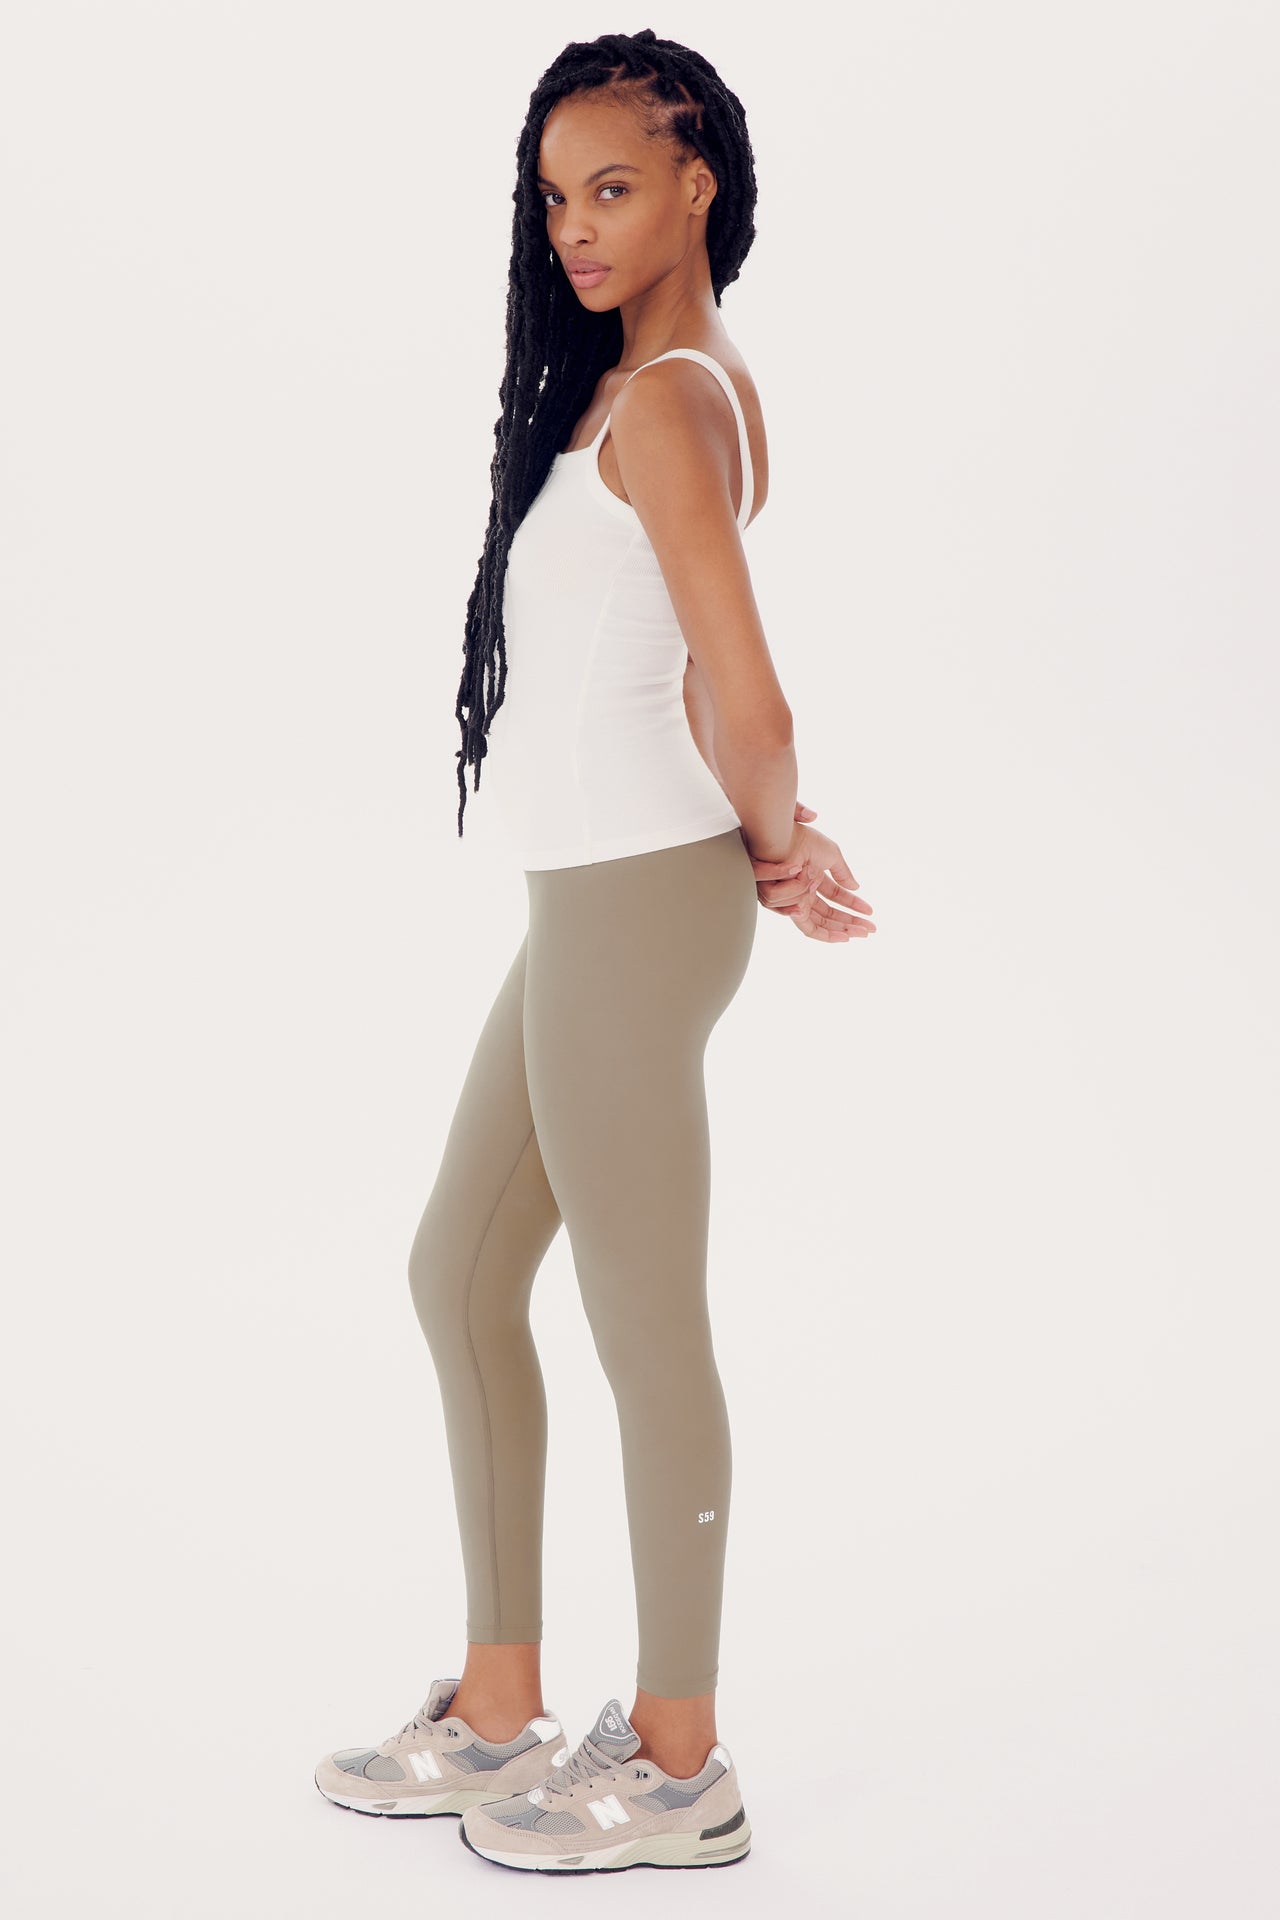 A woman in a white tank top and SPLITS59 Sprint High Waist Rigor 7/8 - Latte leggings stands sideways, looking at the camera, with long braided hair and sneakers.